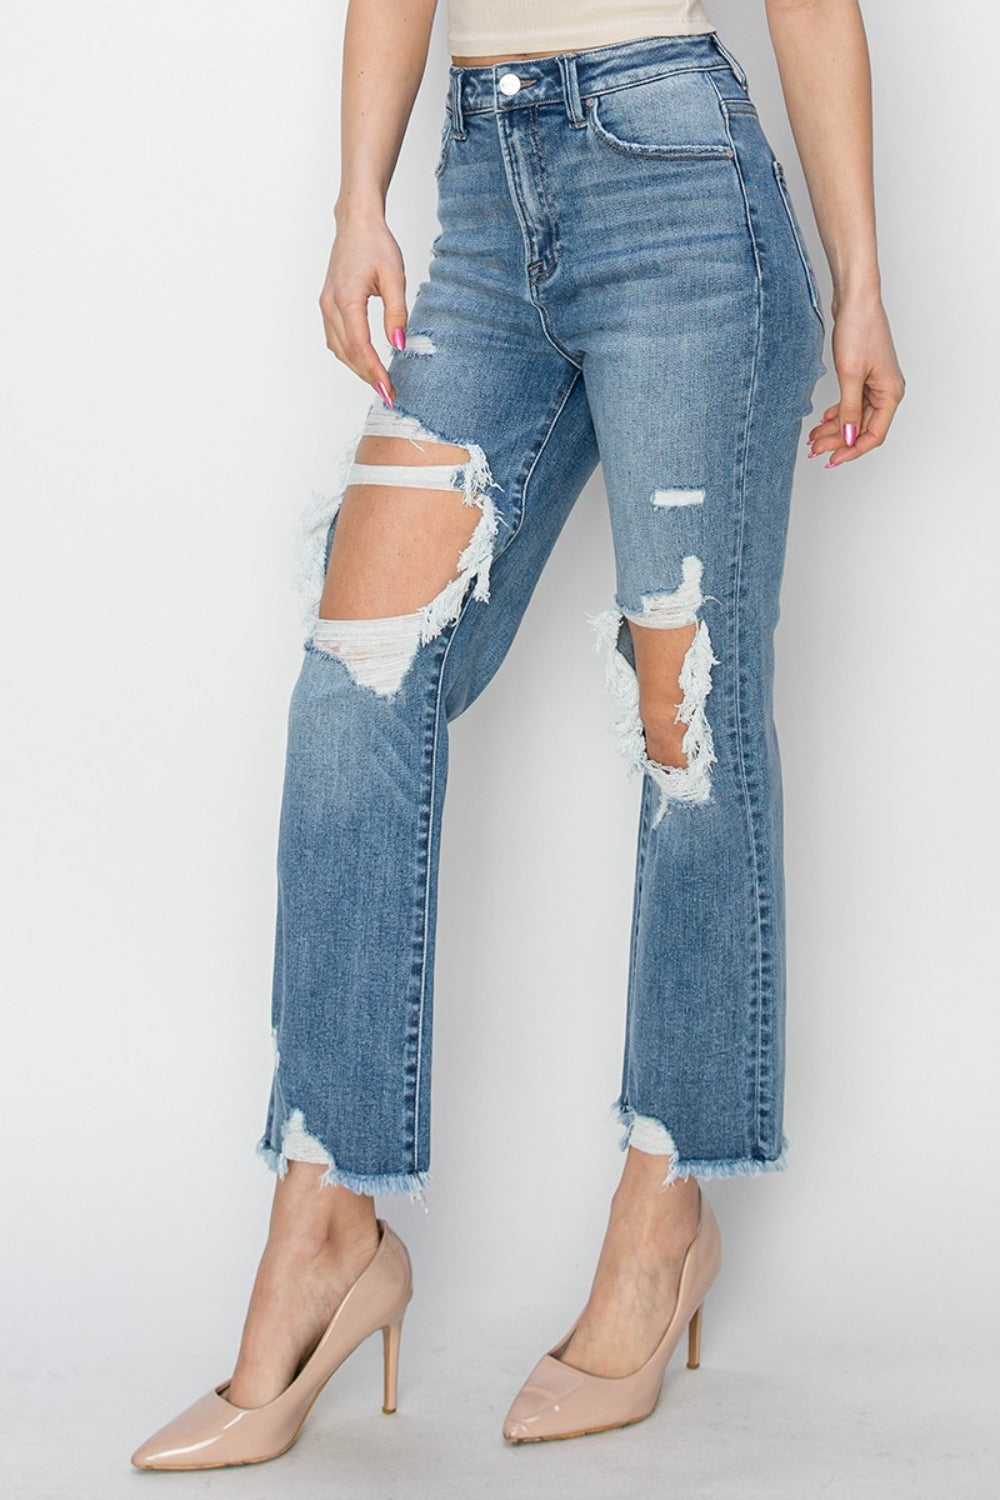 High Rise Distressed Crop Straight Jeans are a trendy and versatile wardrobe essential. The high rise design offers a flattering fit that accentuates the waist and elongates the legs. The distressed detailing adds a touch of edgy charm to the jeans, giving them a cool and casual vibe. The cropped length is perfect for showcasing your favorite shoes and adding a modern touch to your outfit. 0-15